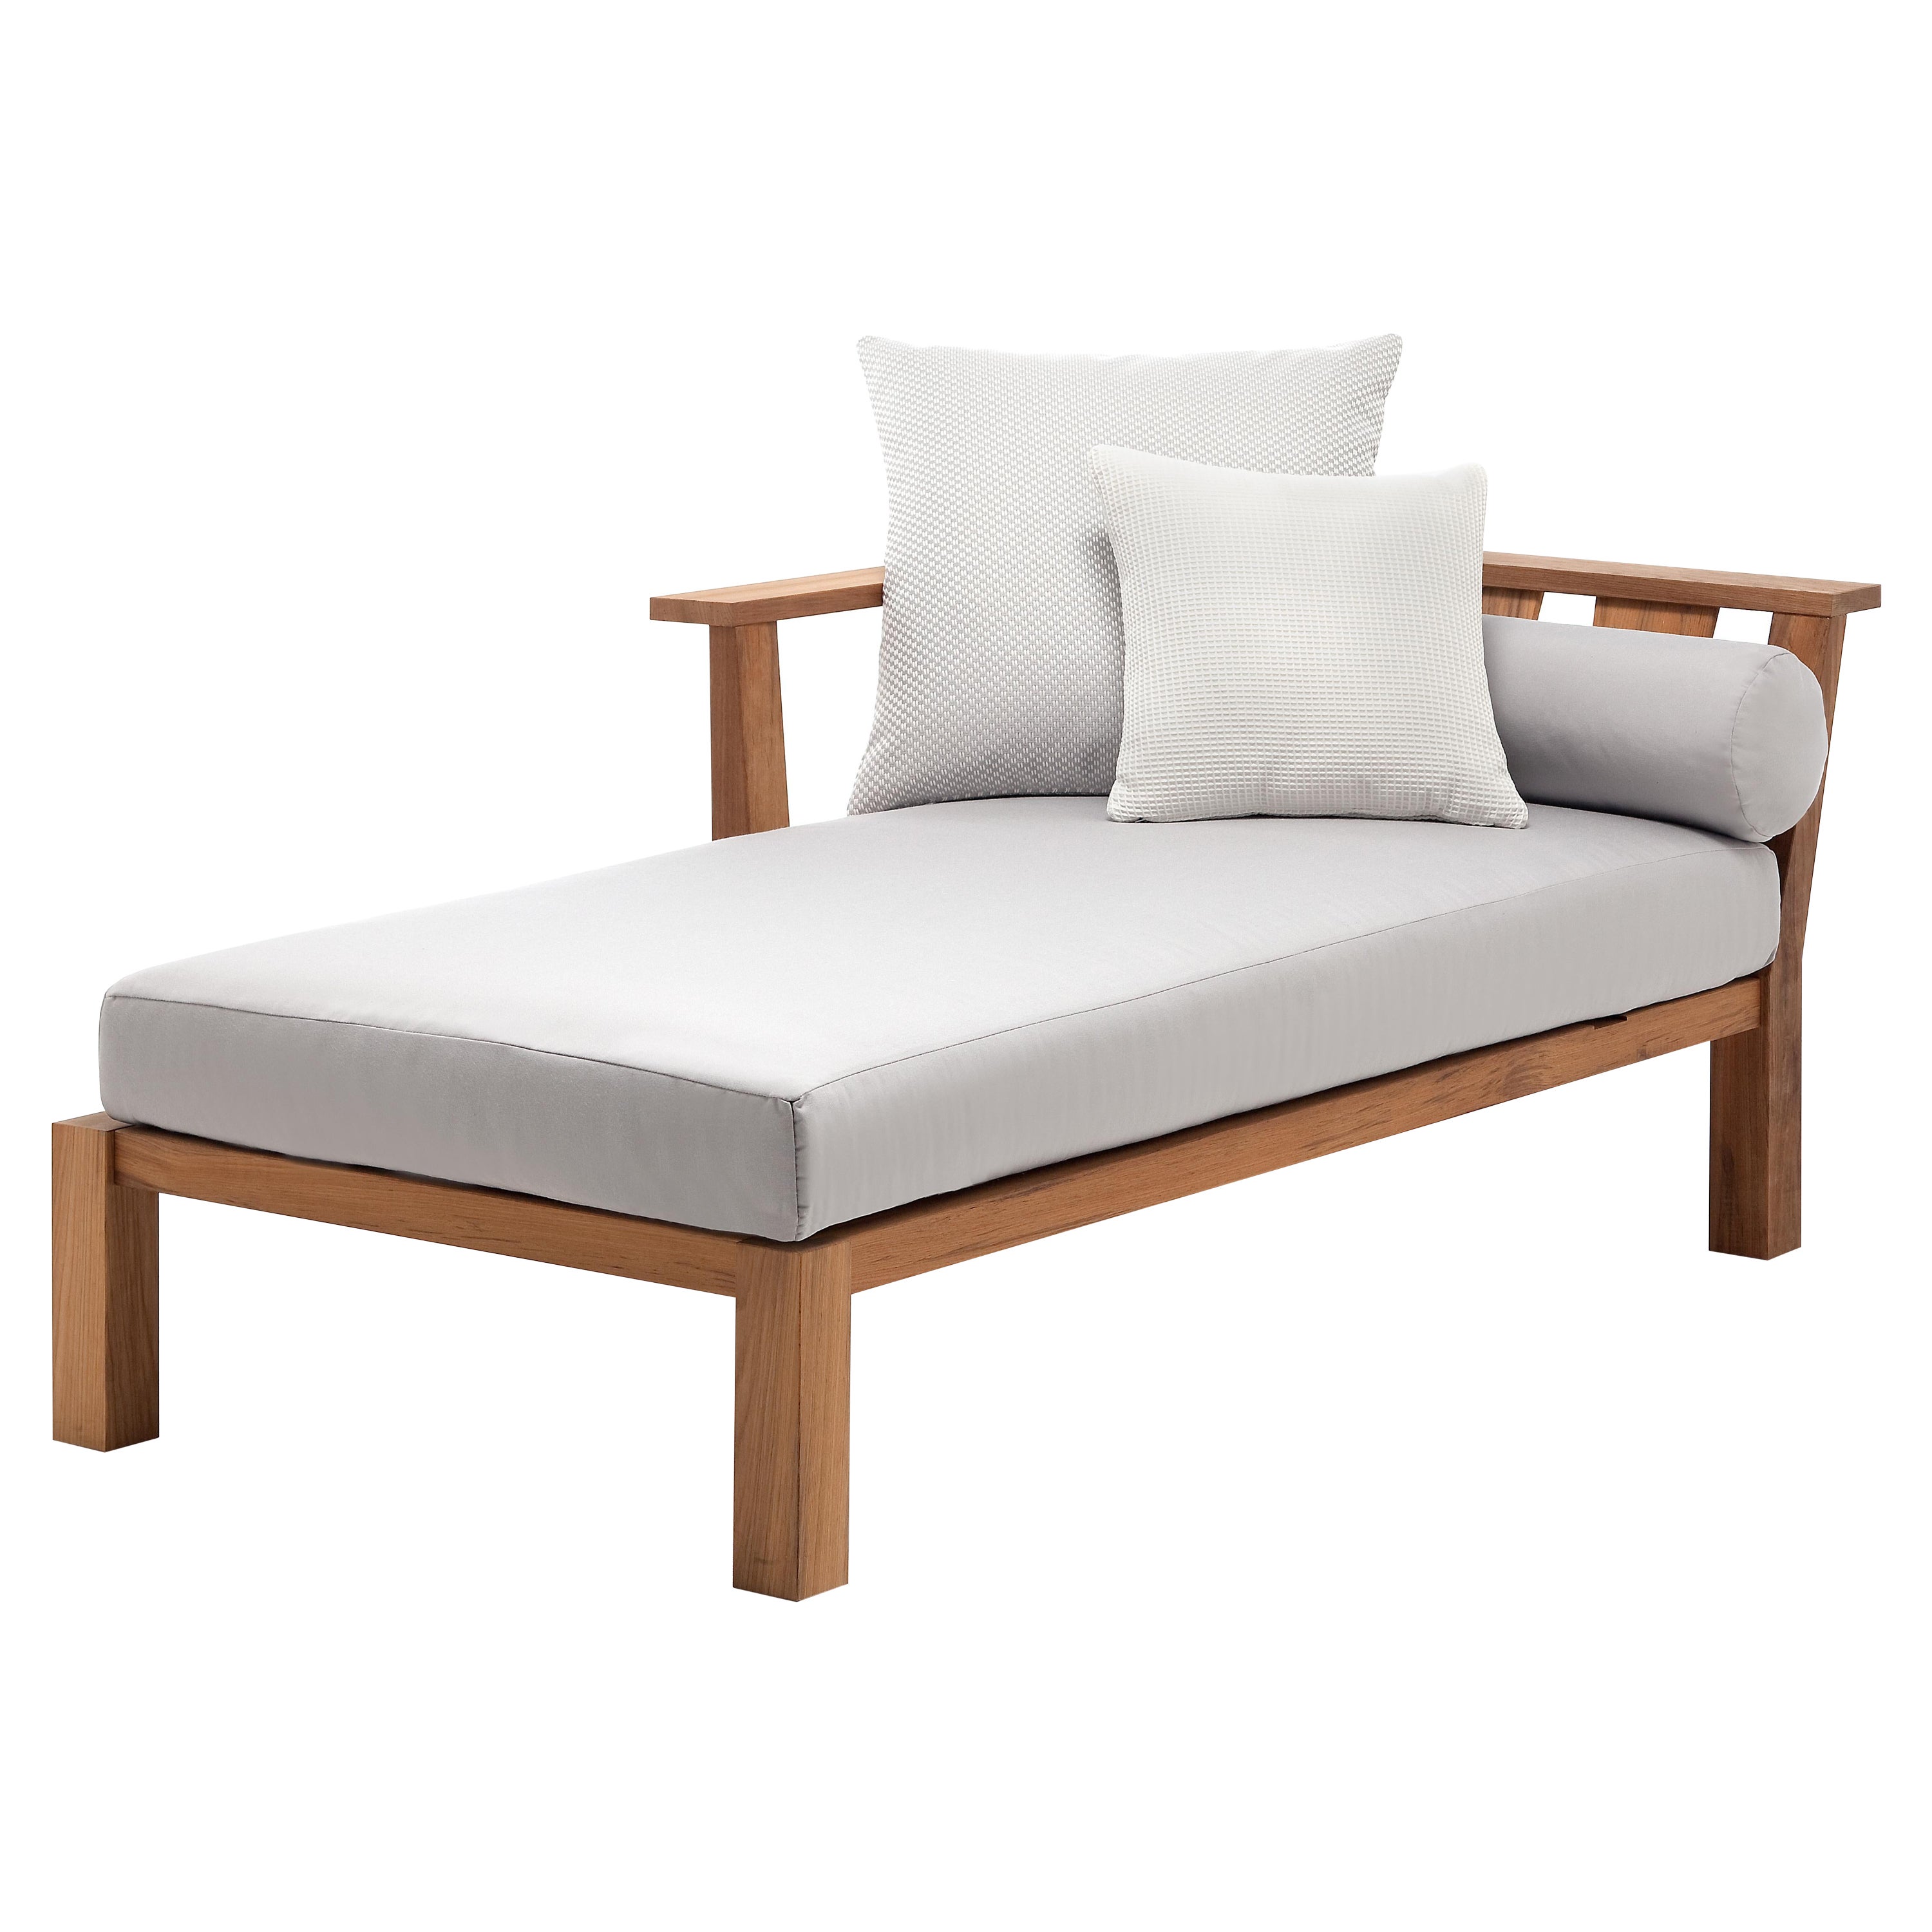 Gervasoni Inout Modular Day Bed in London 07 Upholstery with Natural Teak Frame